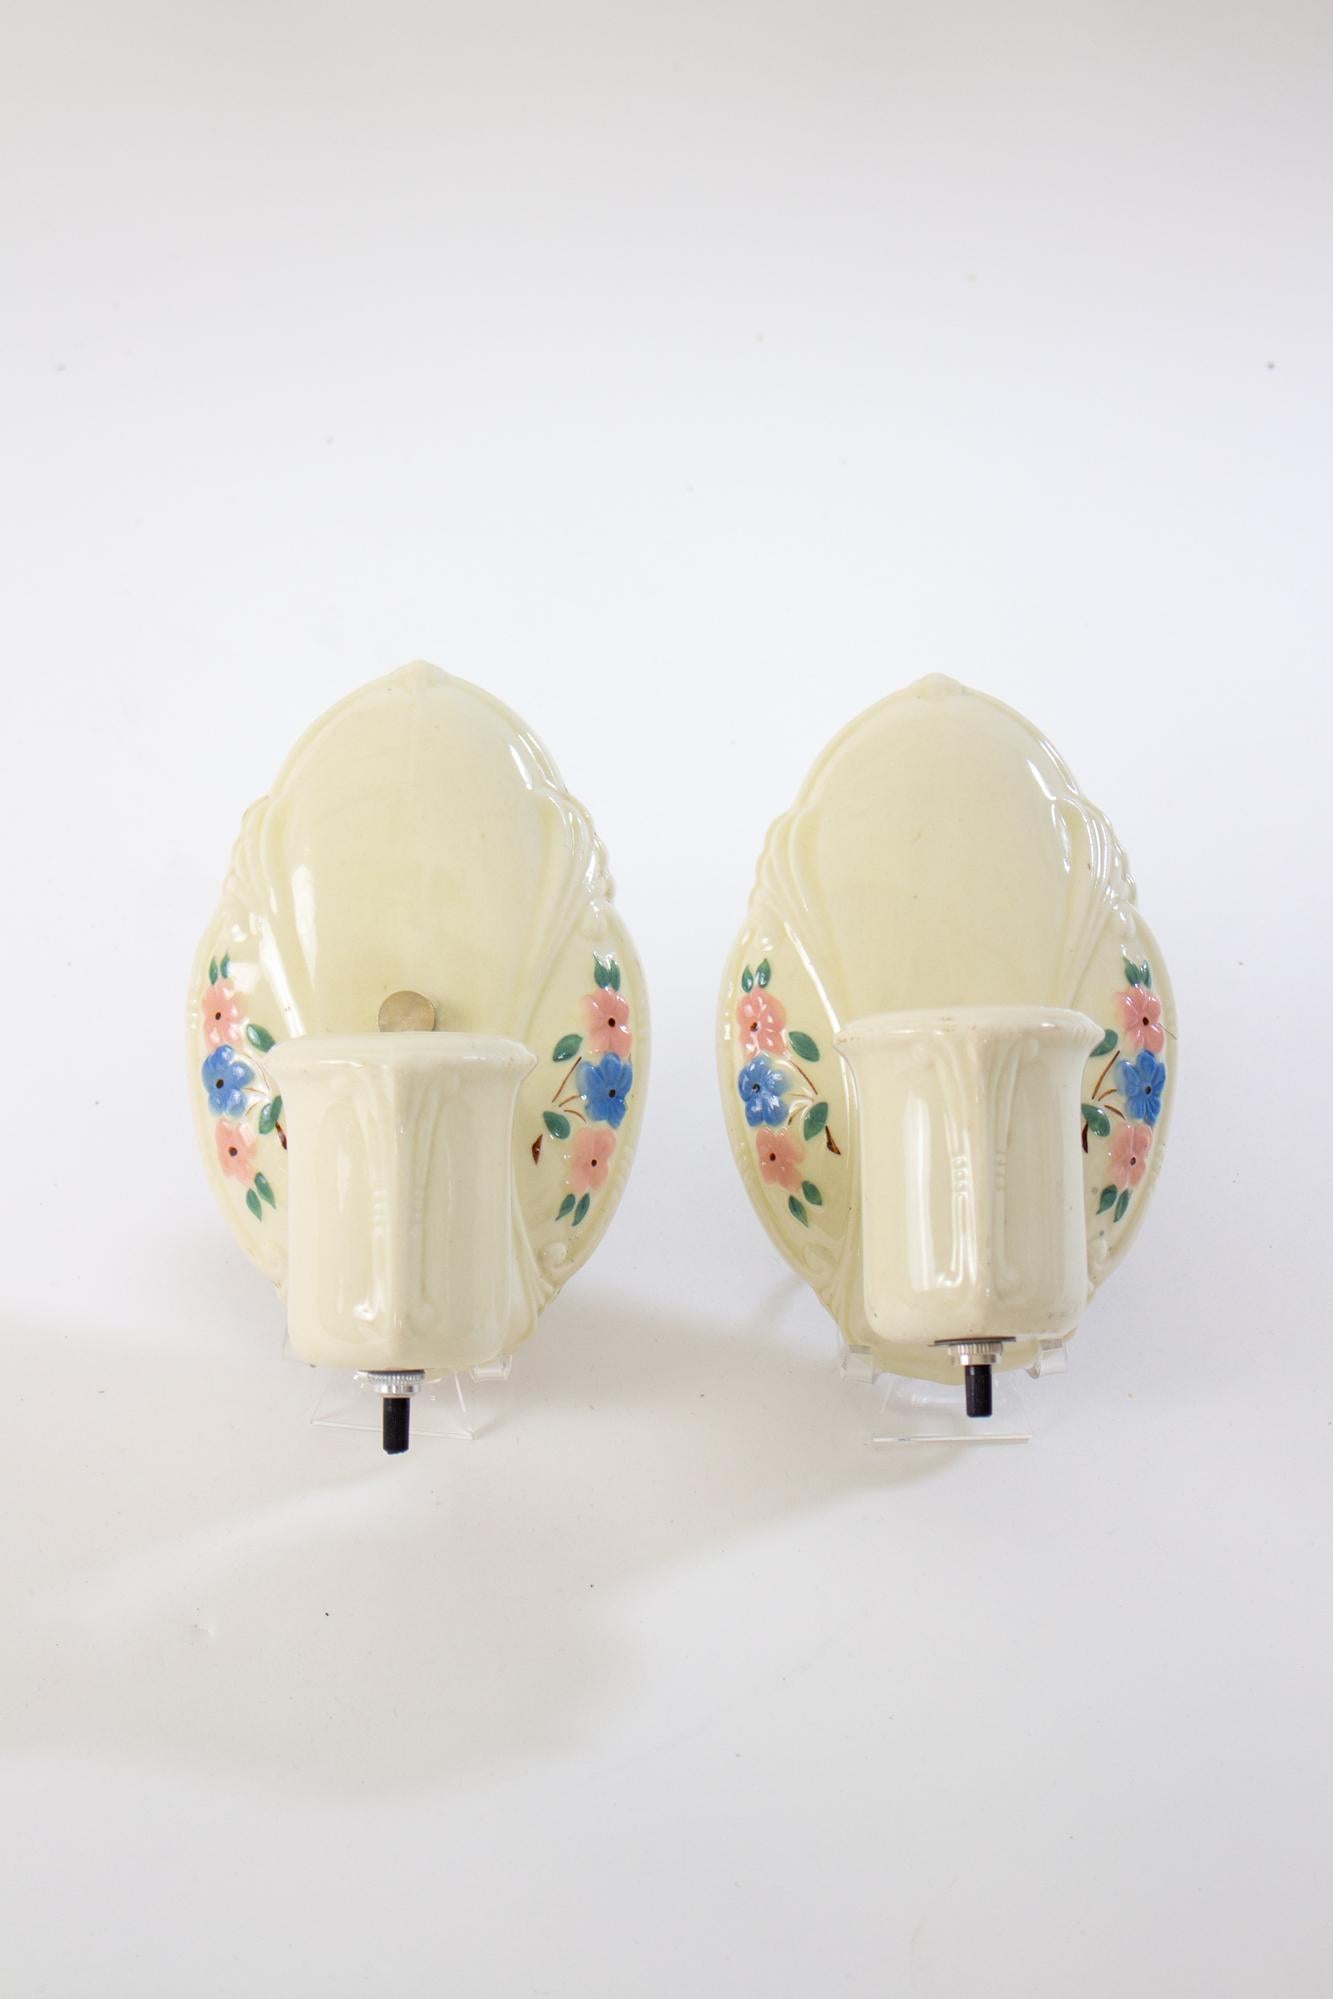 1950’s Porcelain Harmony House flowered sconces, a pair. Simple porcelain sconces. Ivory with blue and pink flowers. In good condition, rewired with new socket. Switch on bottom of socket. US 120V hardwired. 

Dimensions: 
Width: 4.5